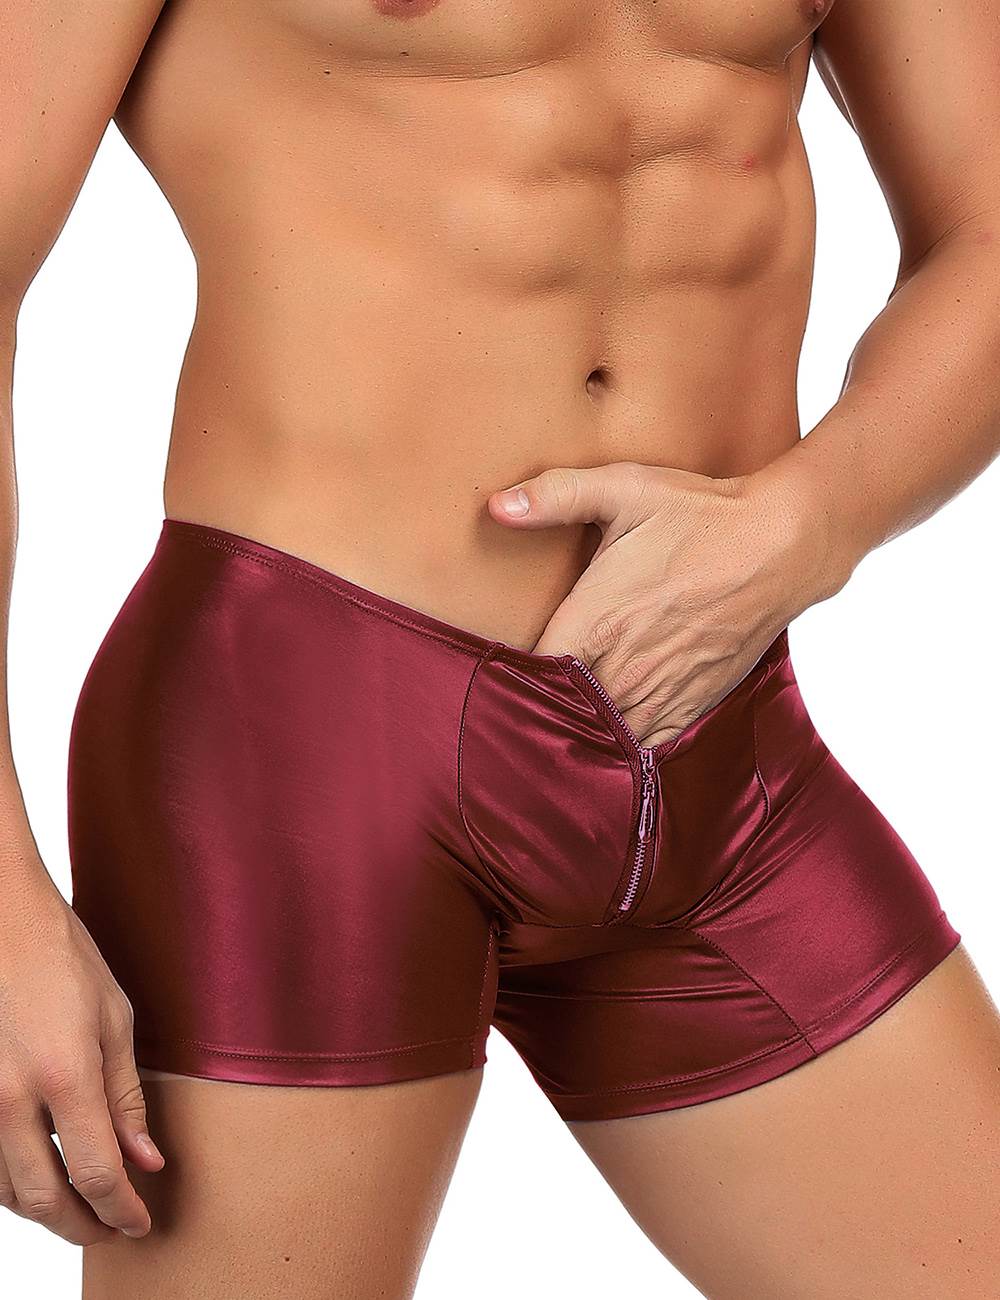 JCSTK -  Mens Wetlook OY-MP069 Boxer Shorts with Zipper Pouch Front Burgundy